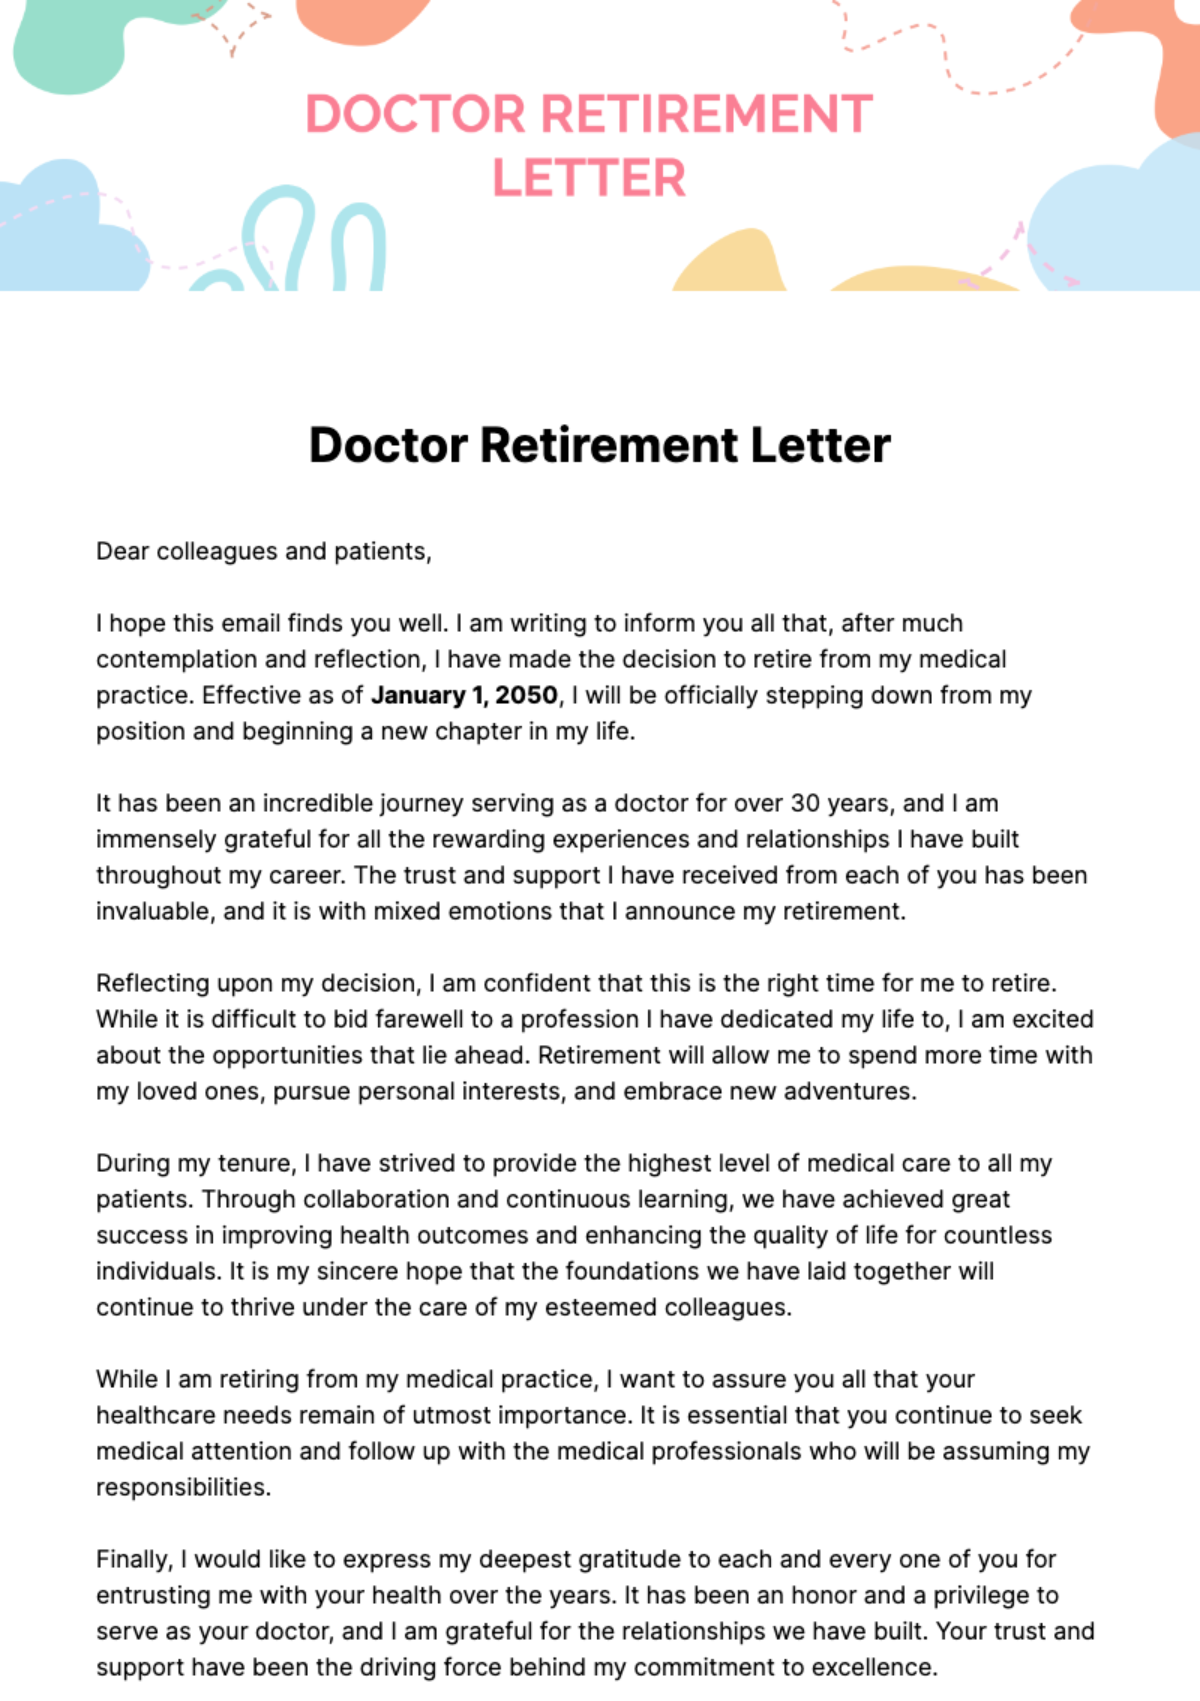 Free Doctor Retirement Letter Template